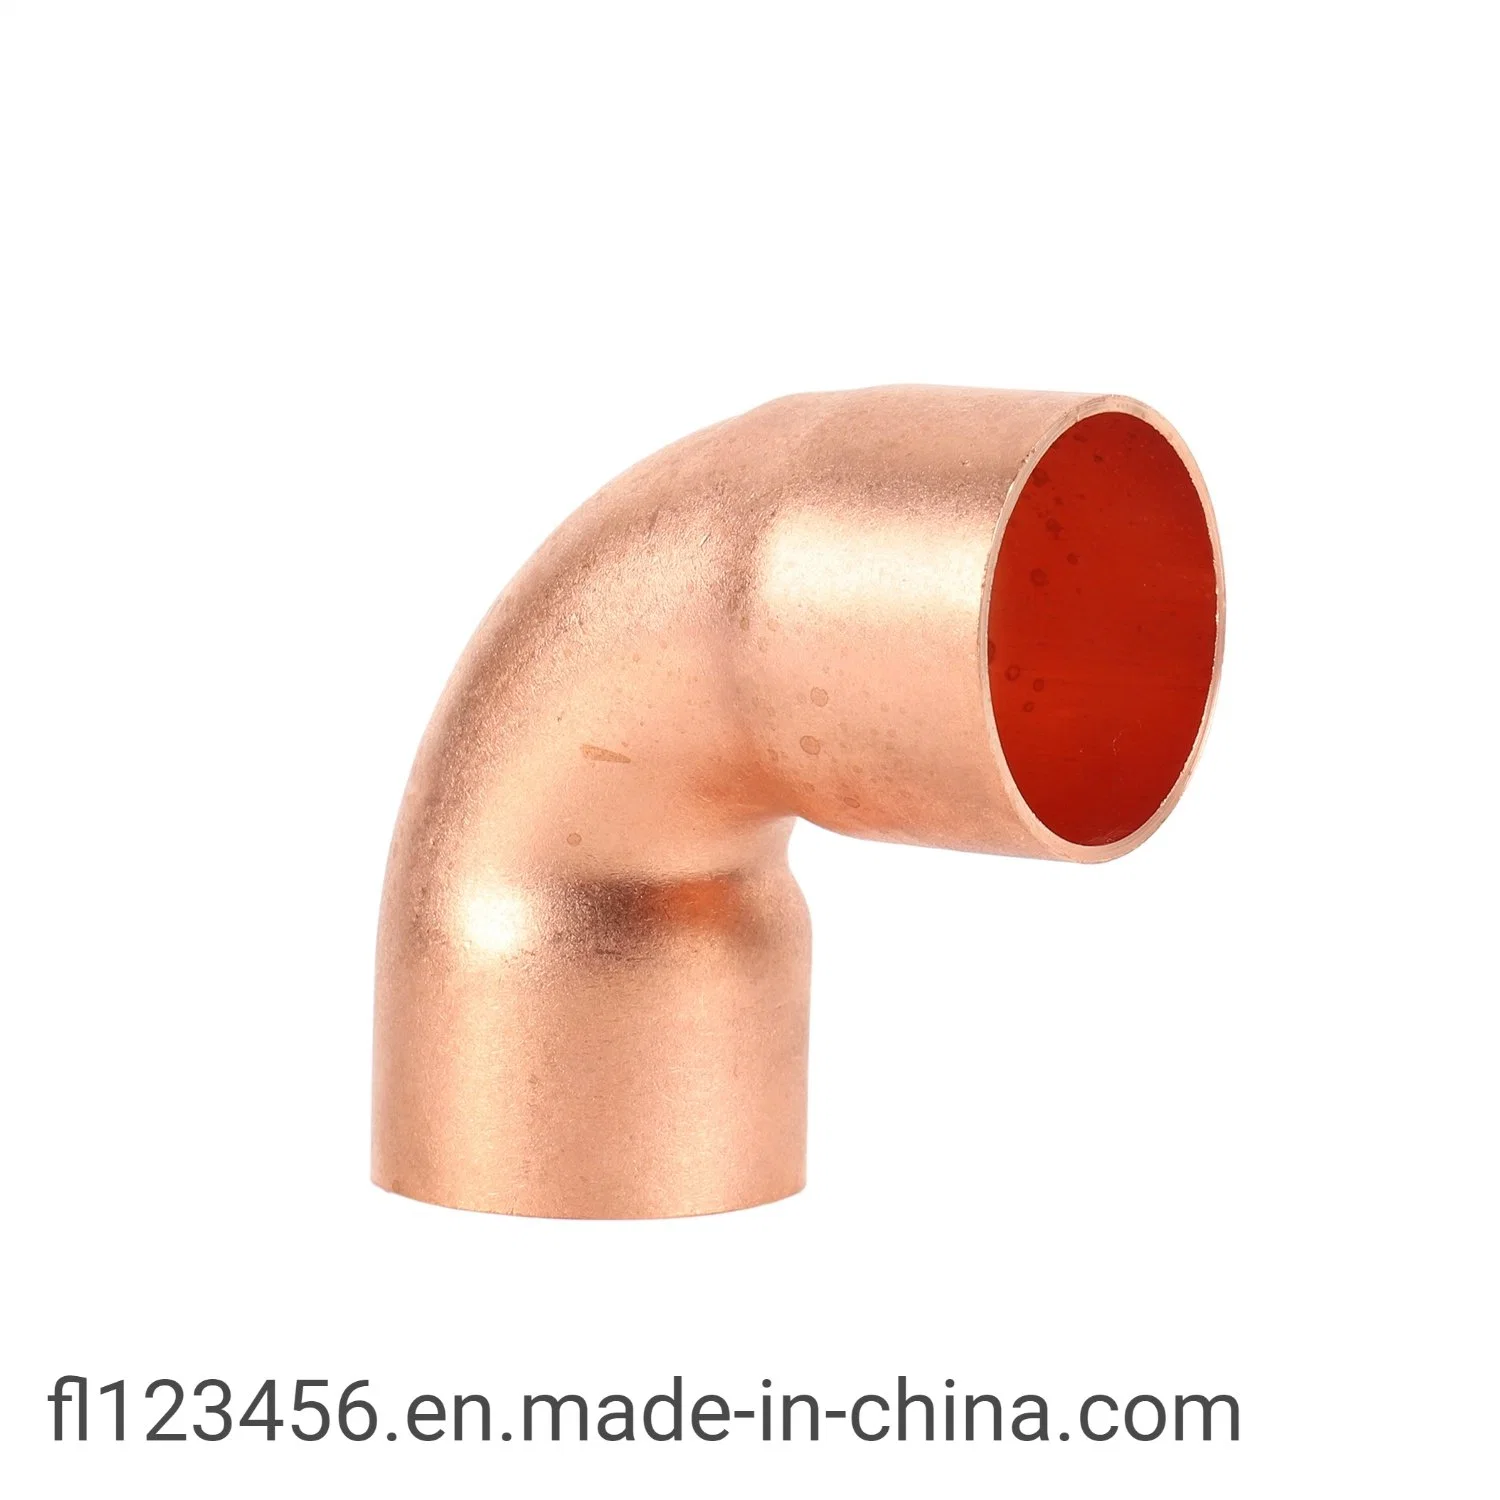 Copper Fittings Refrigeration Parts for Refrigerator and Air Conditioning